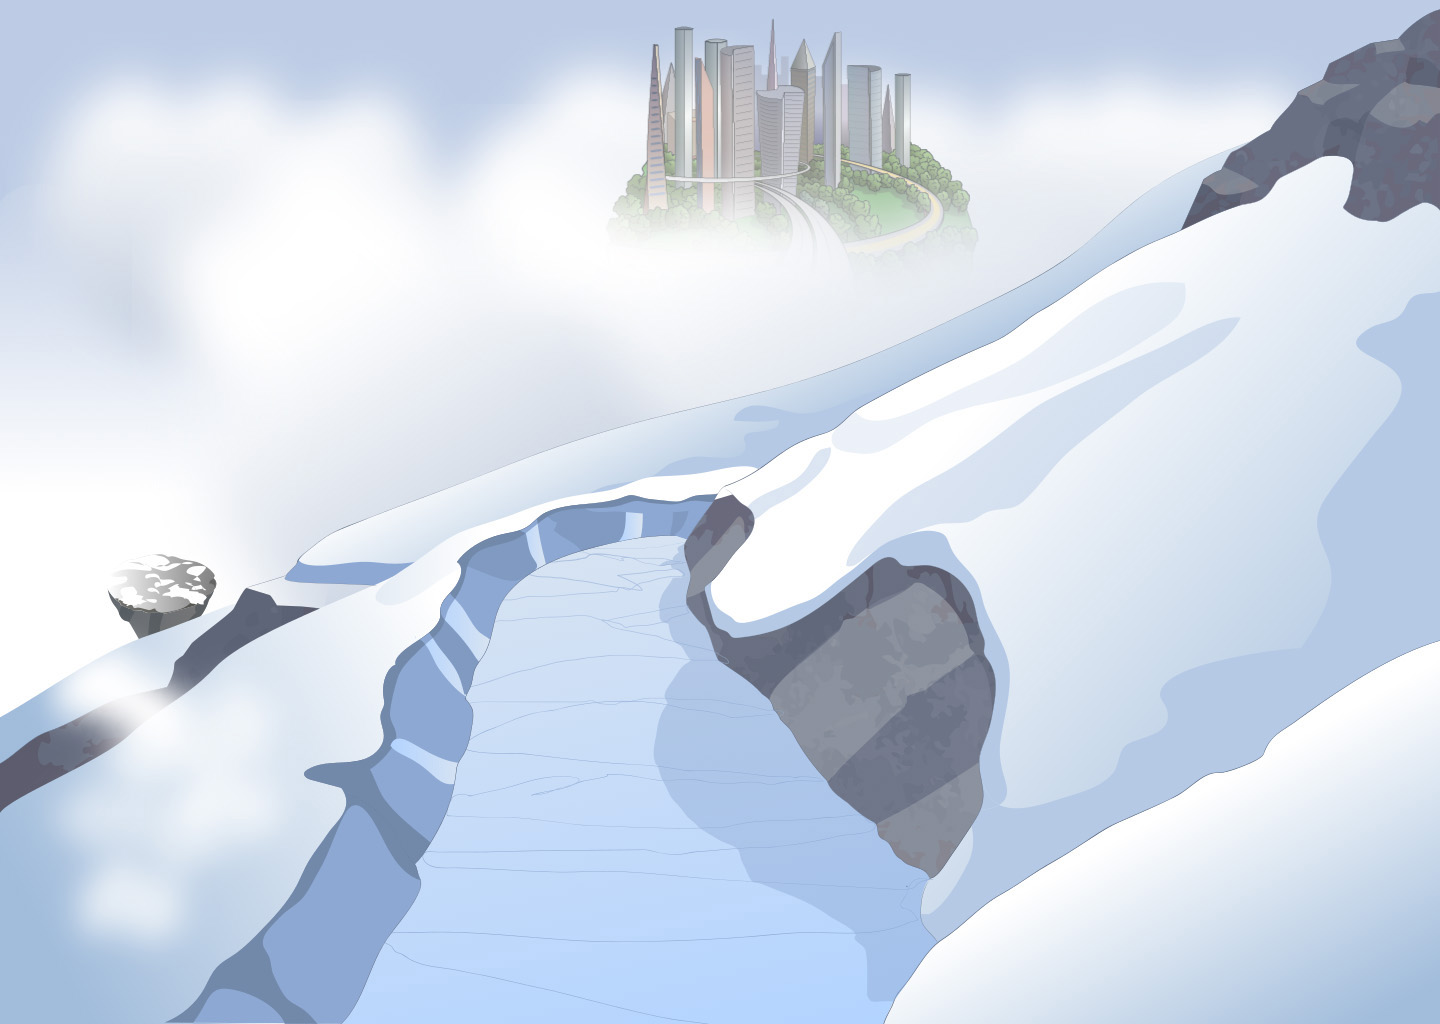 Product screenshot shows an illustration of a snowy mountain path leading to a city in the clouds.